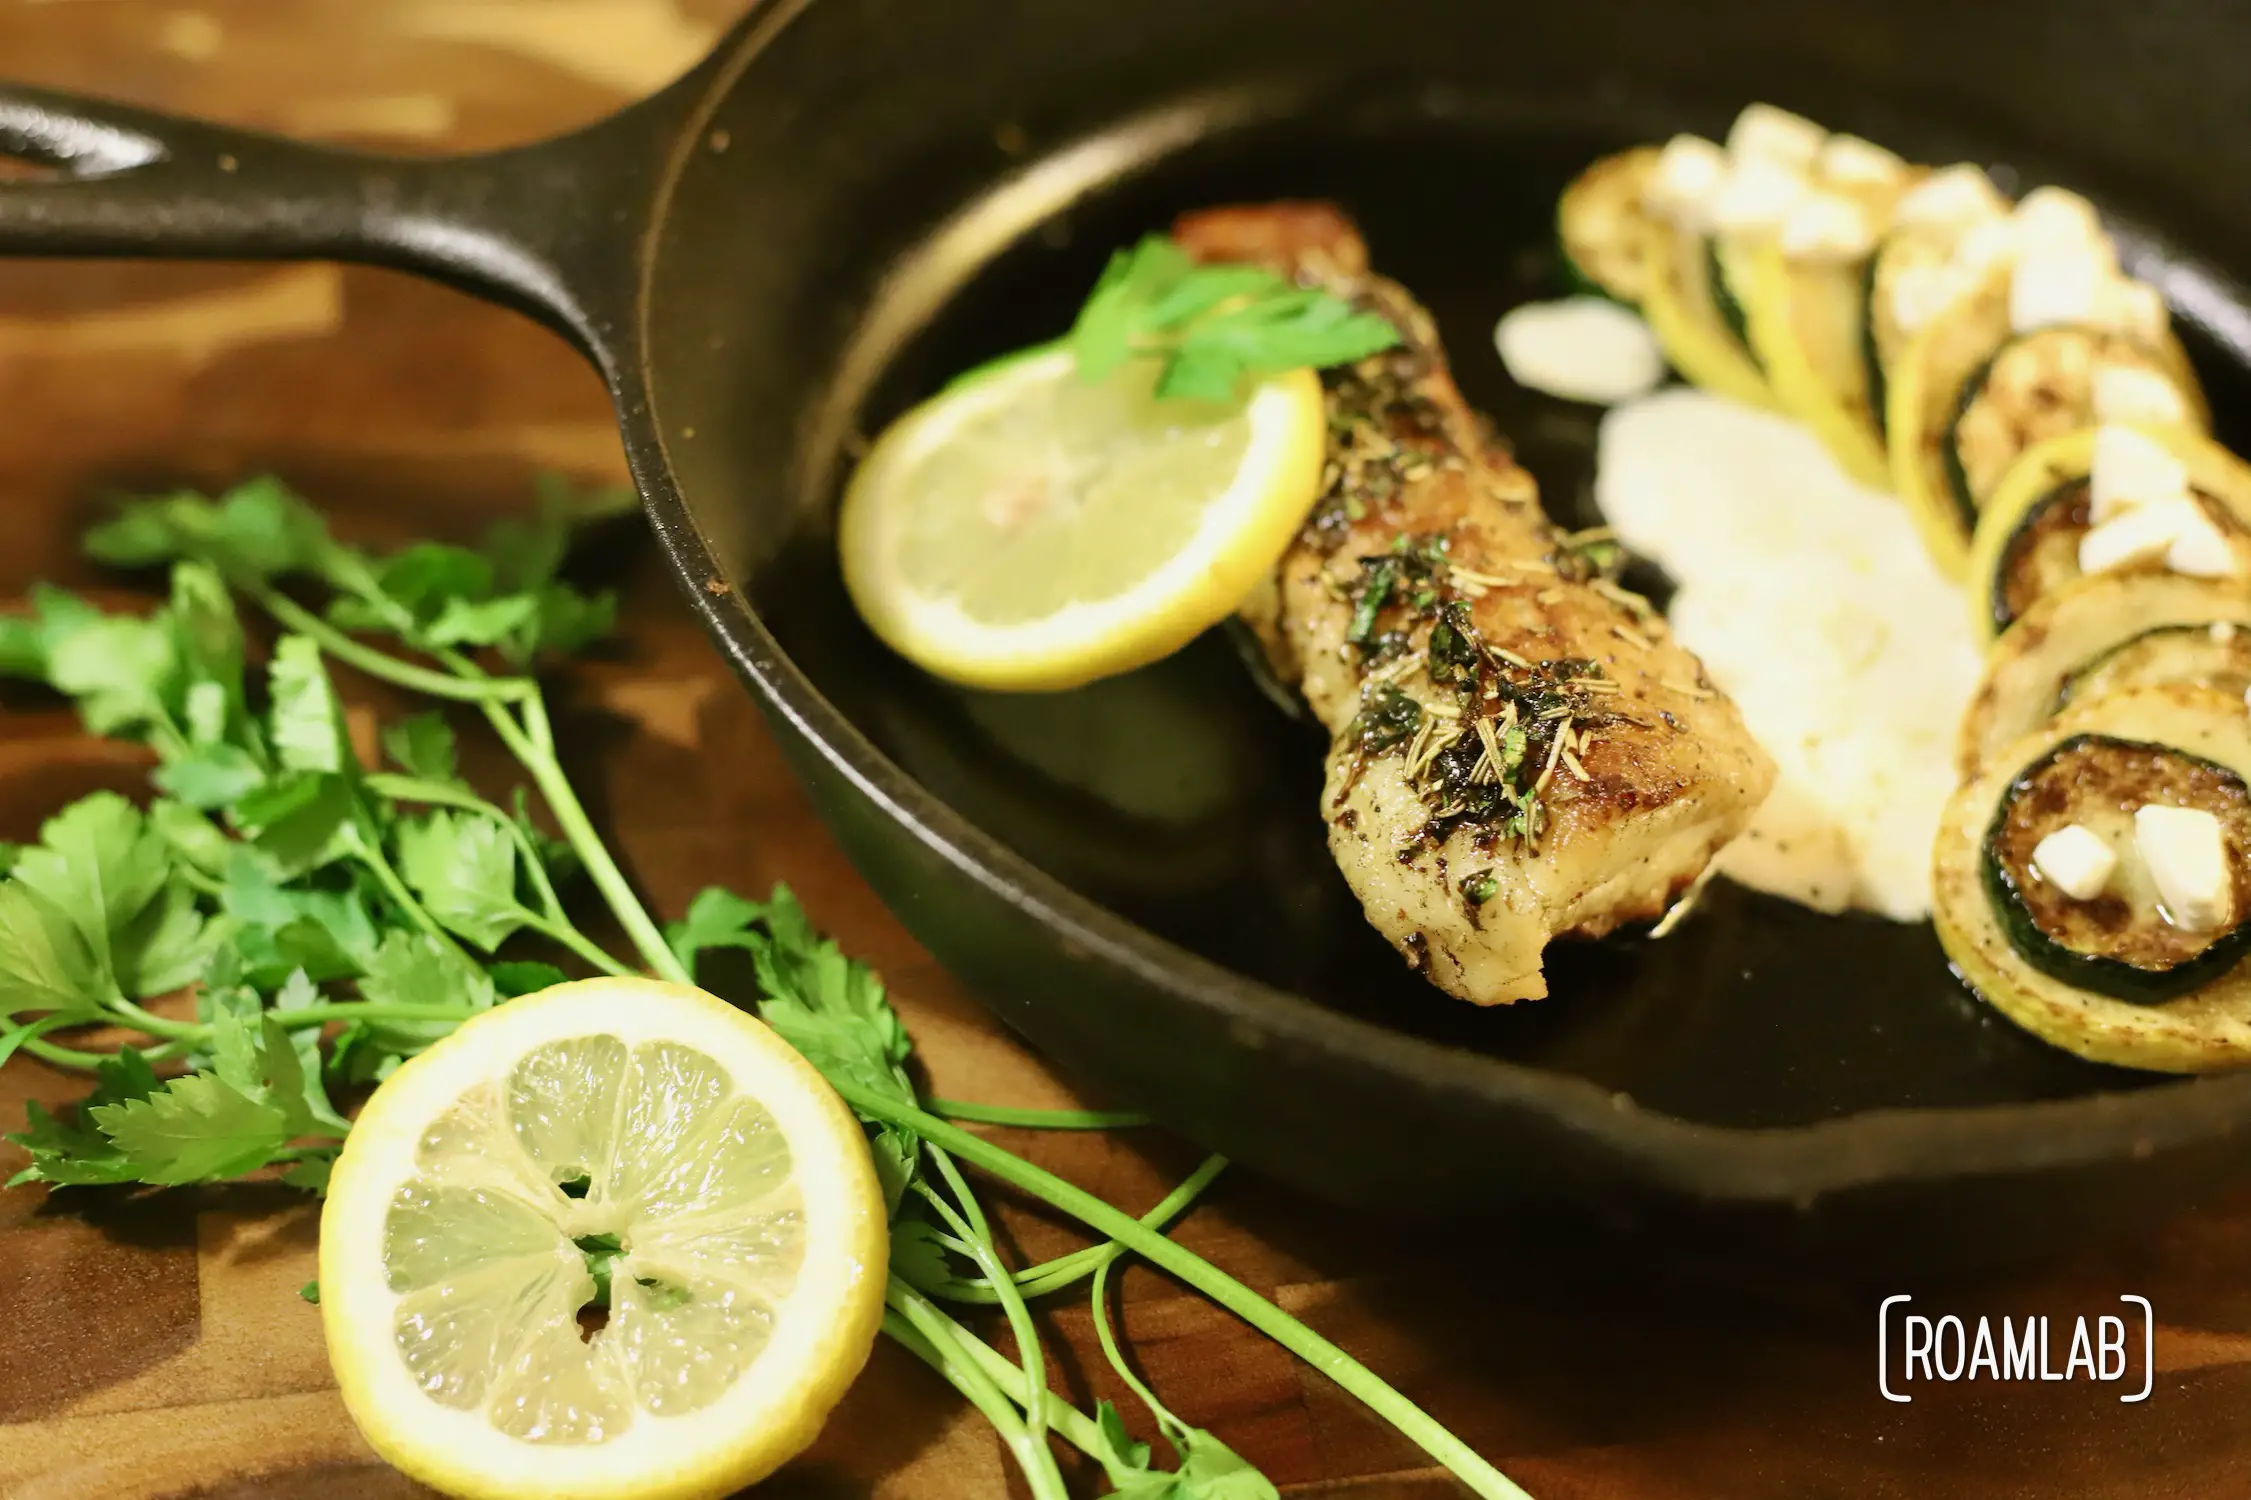 Take your seafood cuisine to the next level with this cast iron skillet seared sea bass in a herb butter sauce campfire cooking dinner recipe